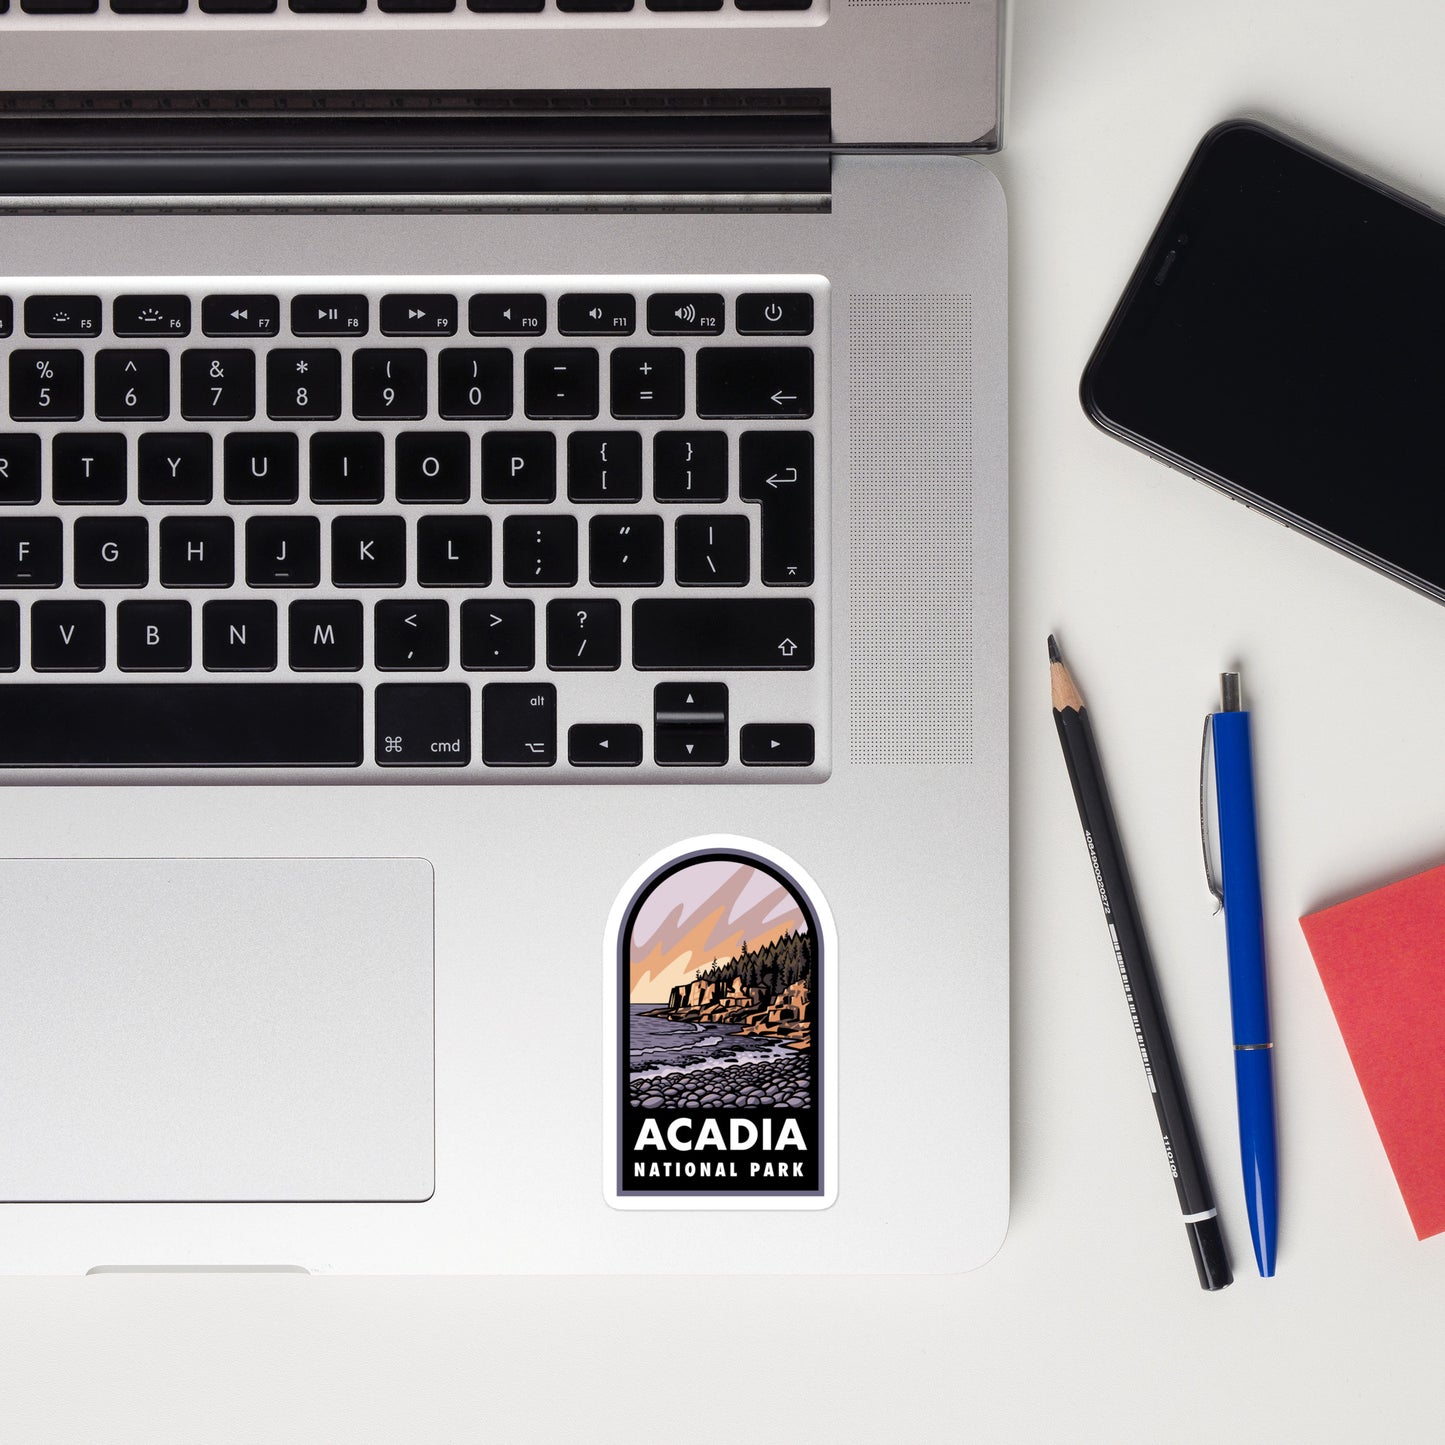 Acadia National Park decal on a laptop keyboard